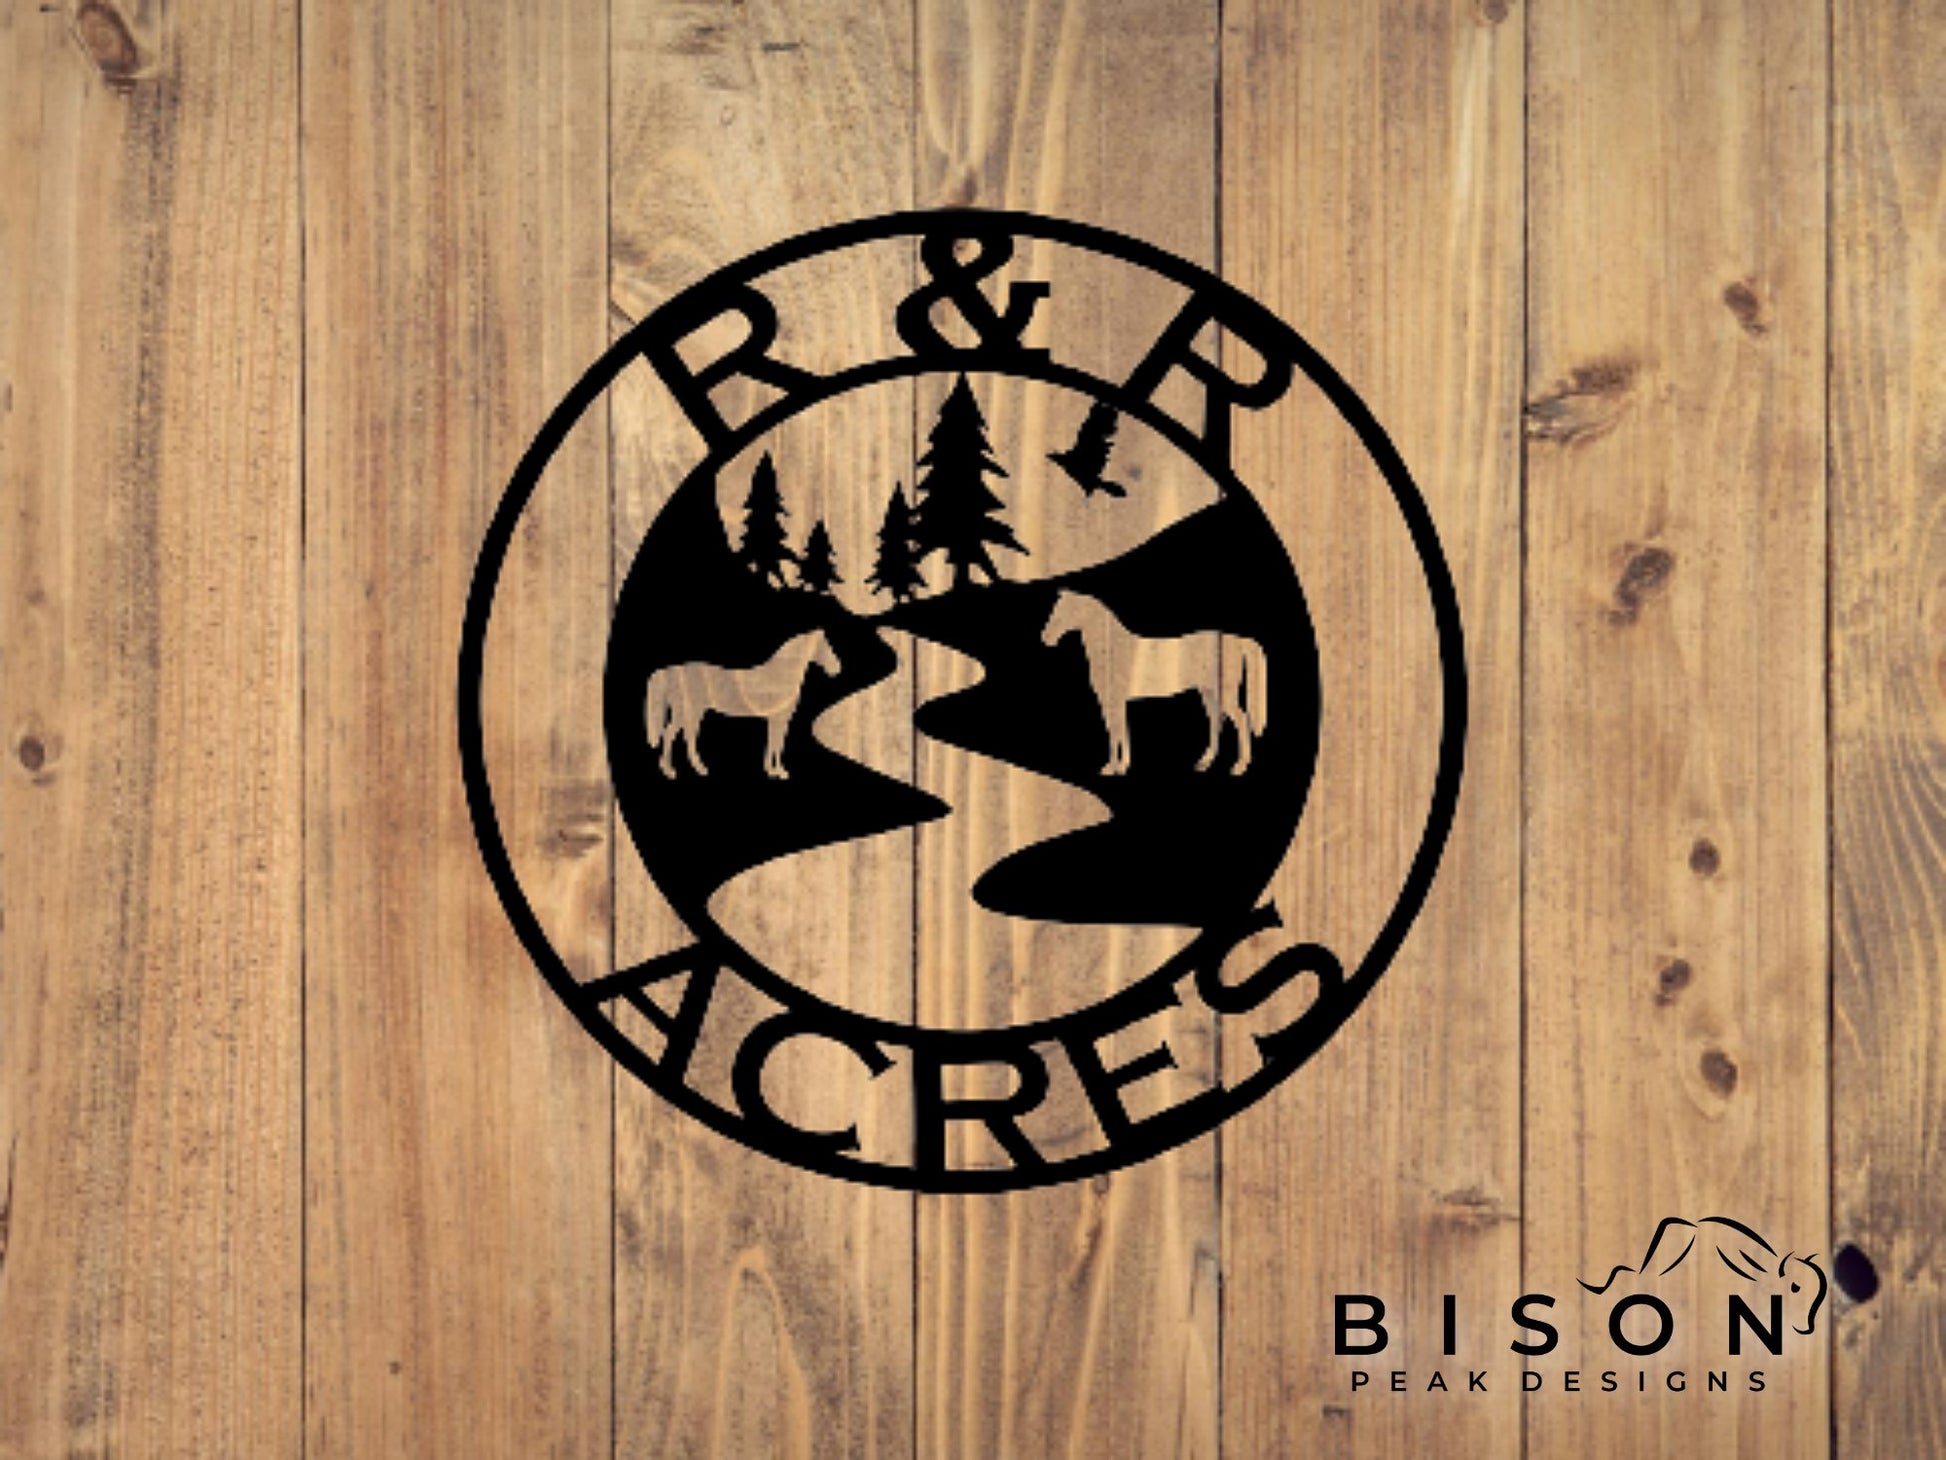 Personalized Ranch round steel sign for the Home or Ranch - Bison Peak DesignsMetal Sign